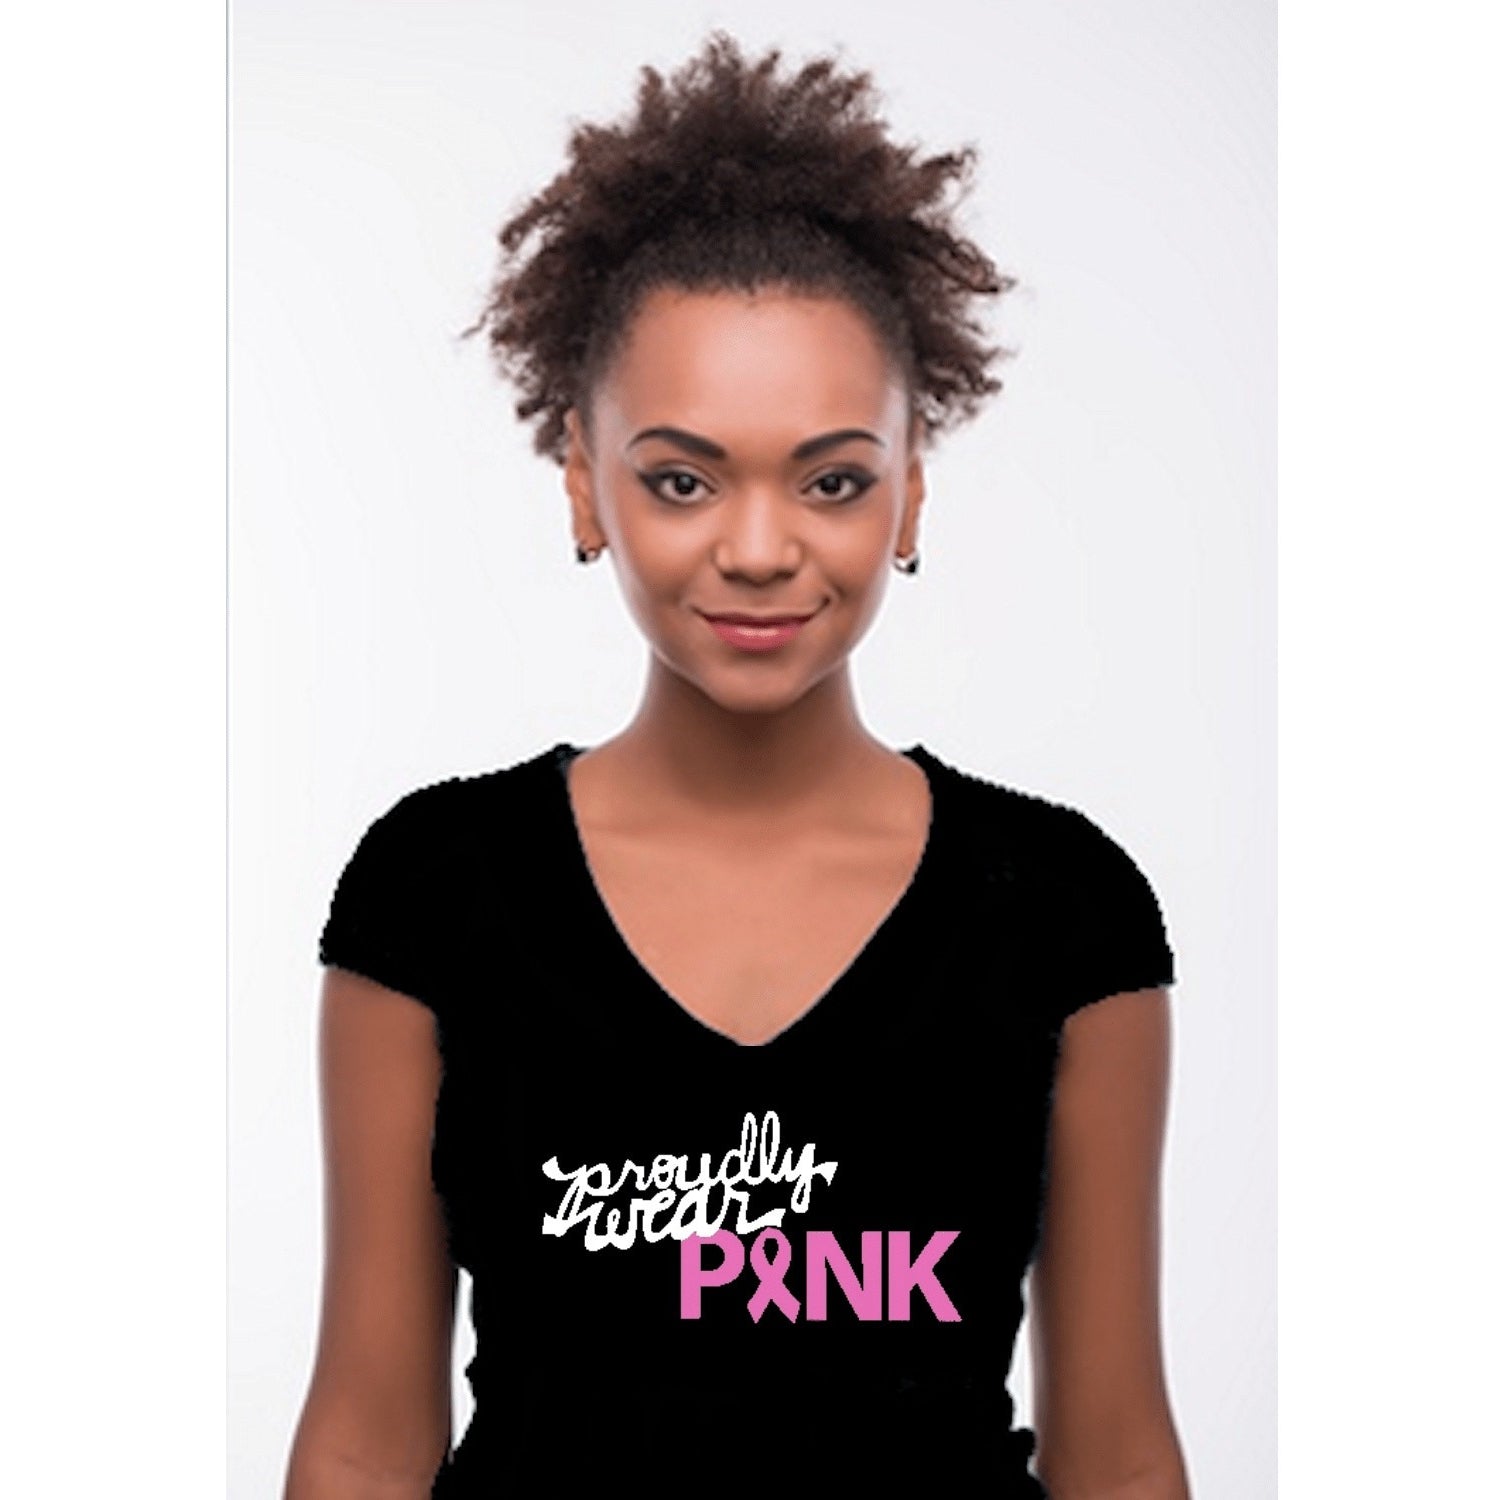 Proudly Wear Pink Breast Cancer Awareness T Shirt